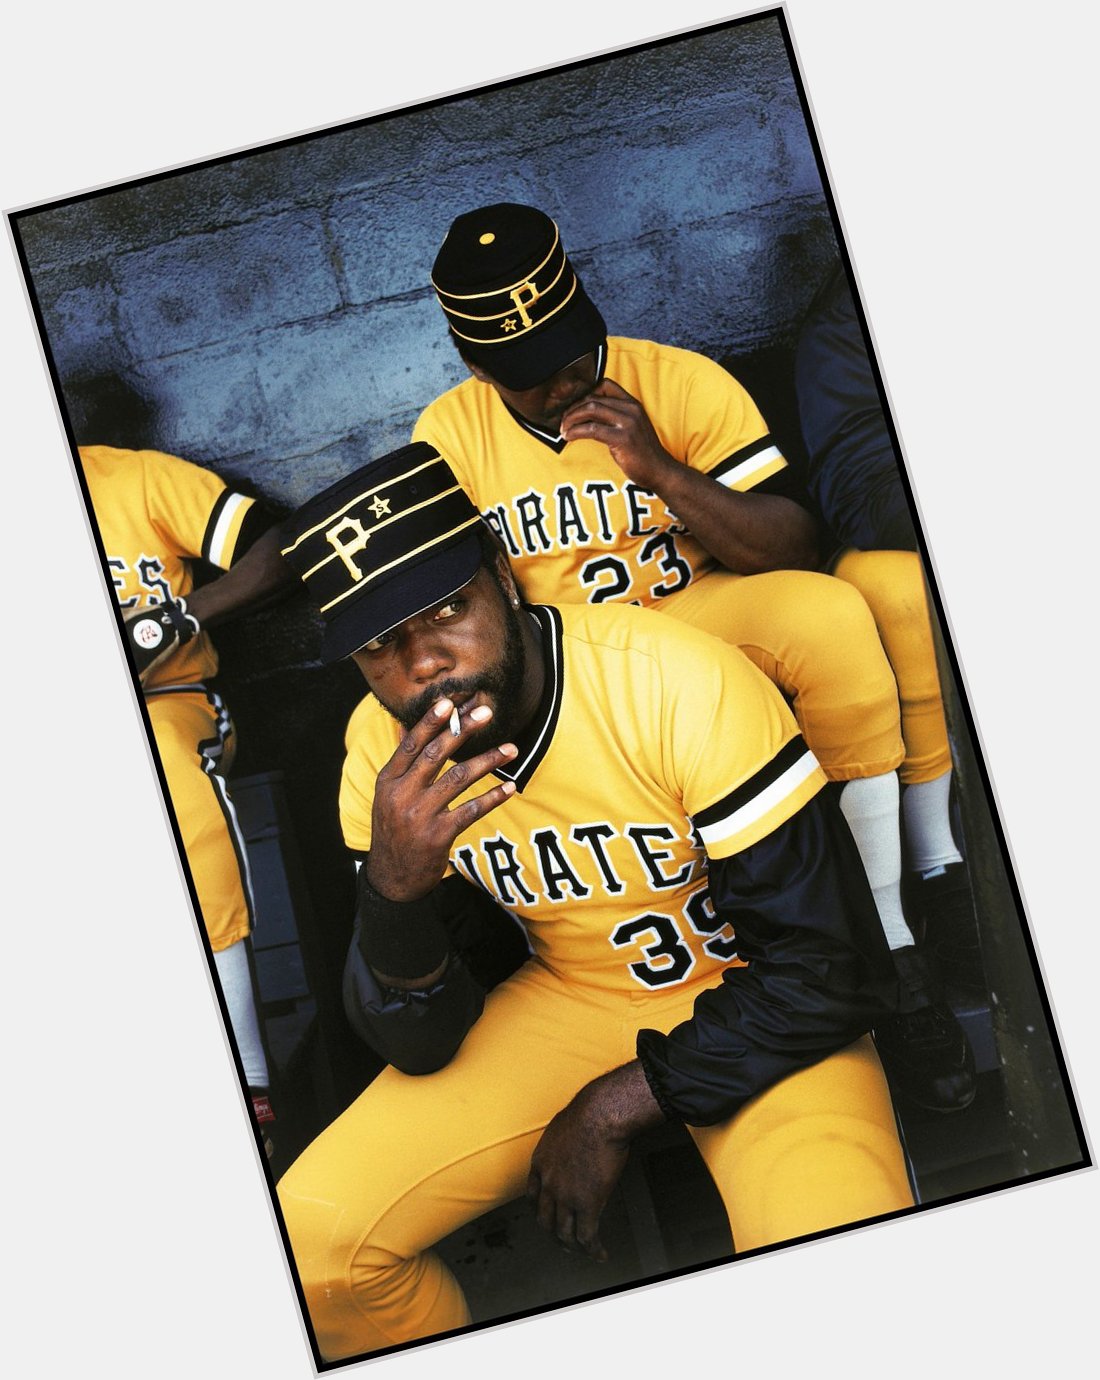 Happy birthday to the legend Dave Parker 